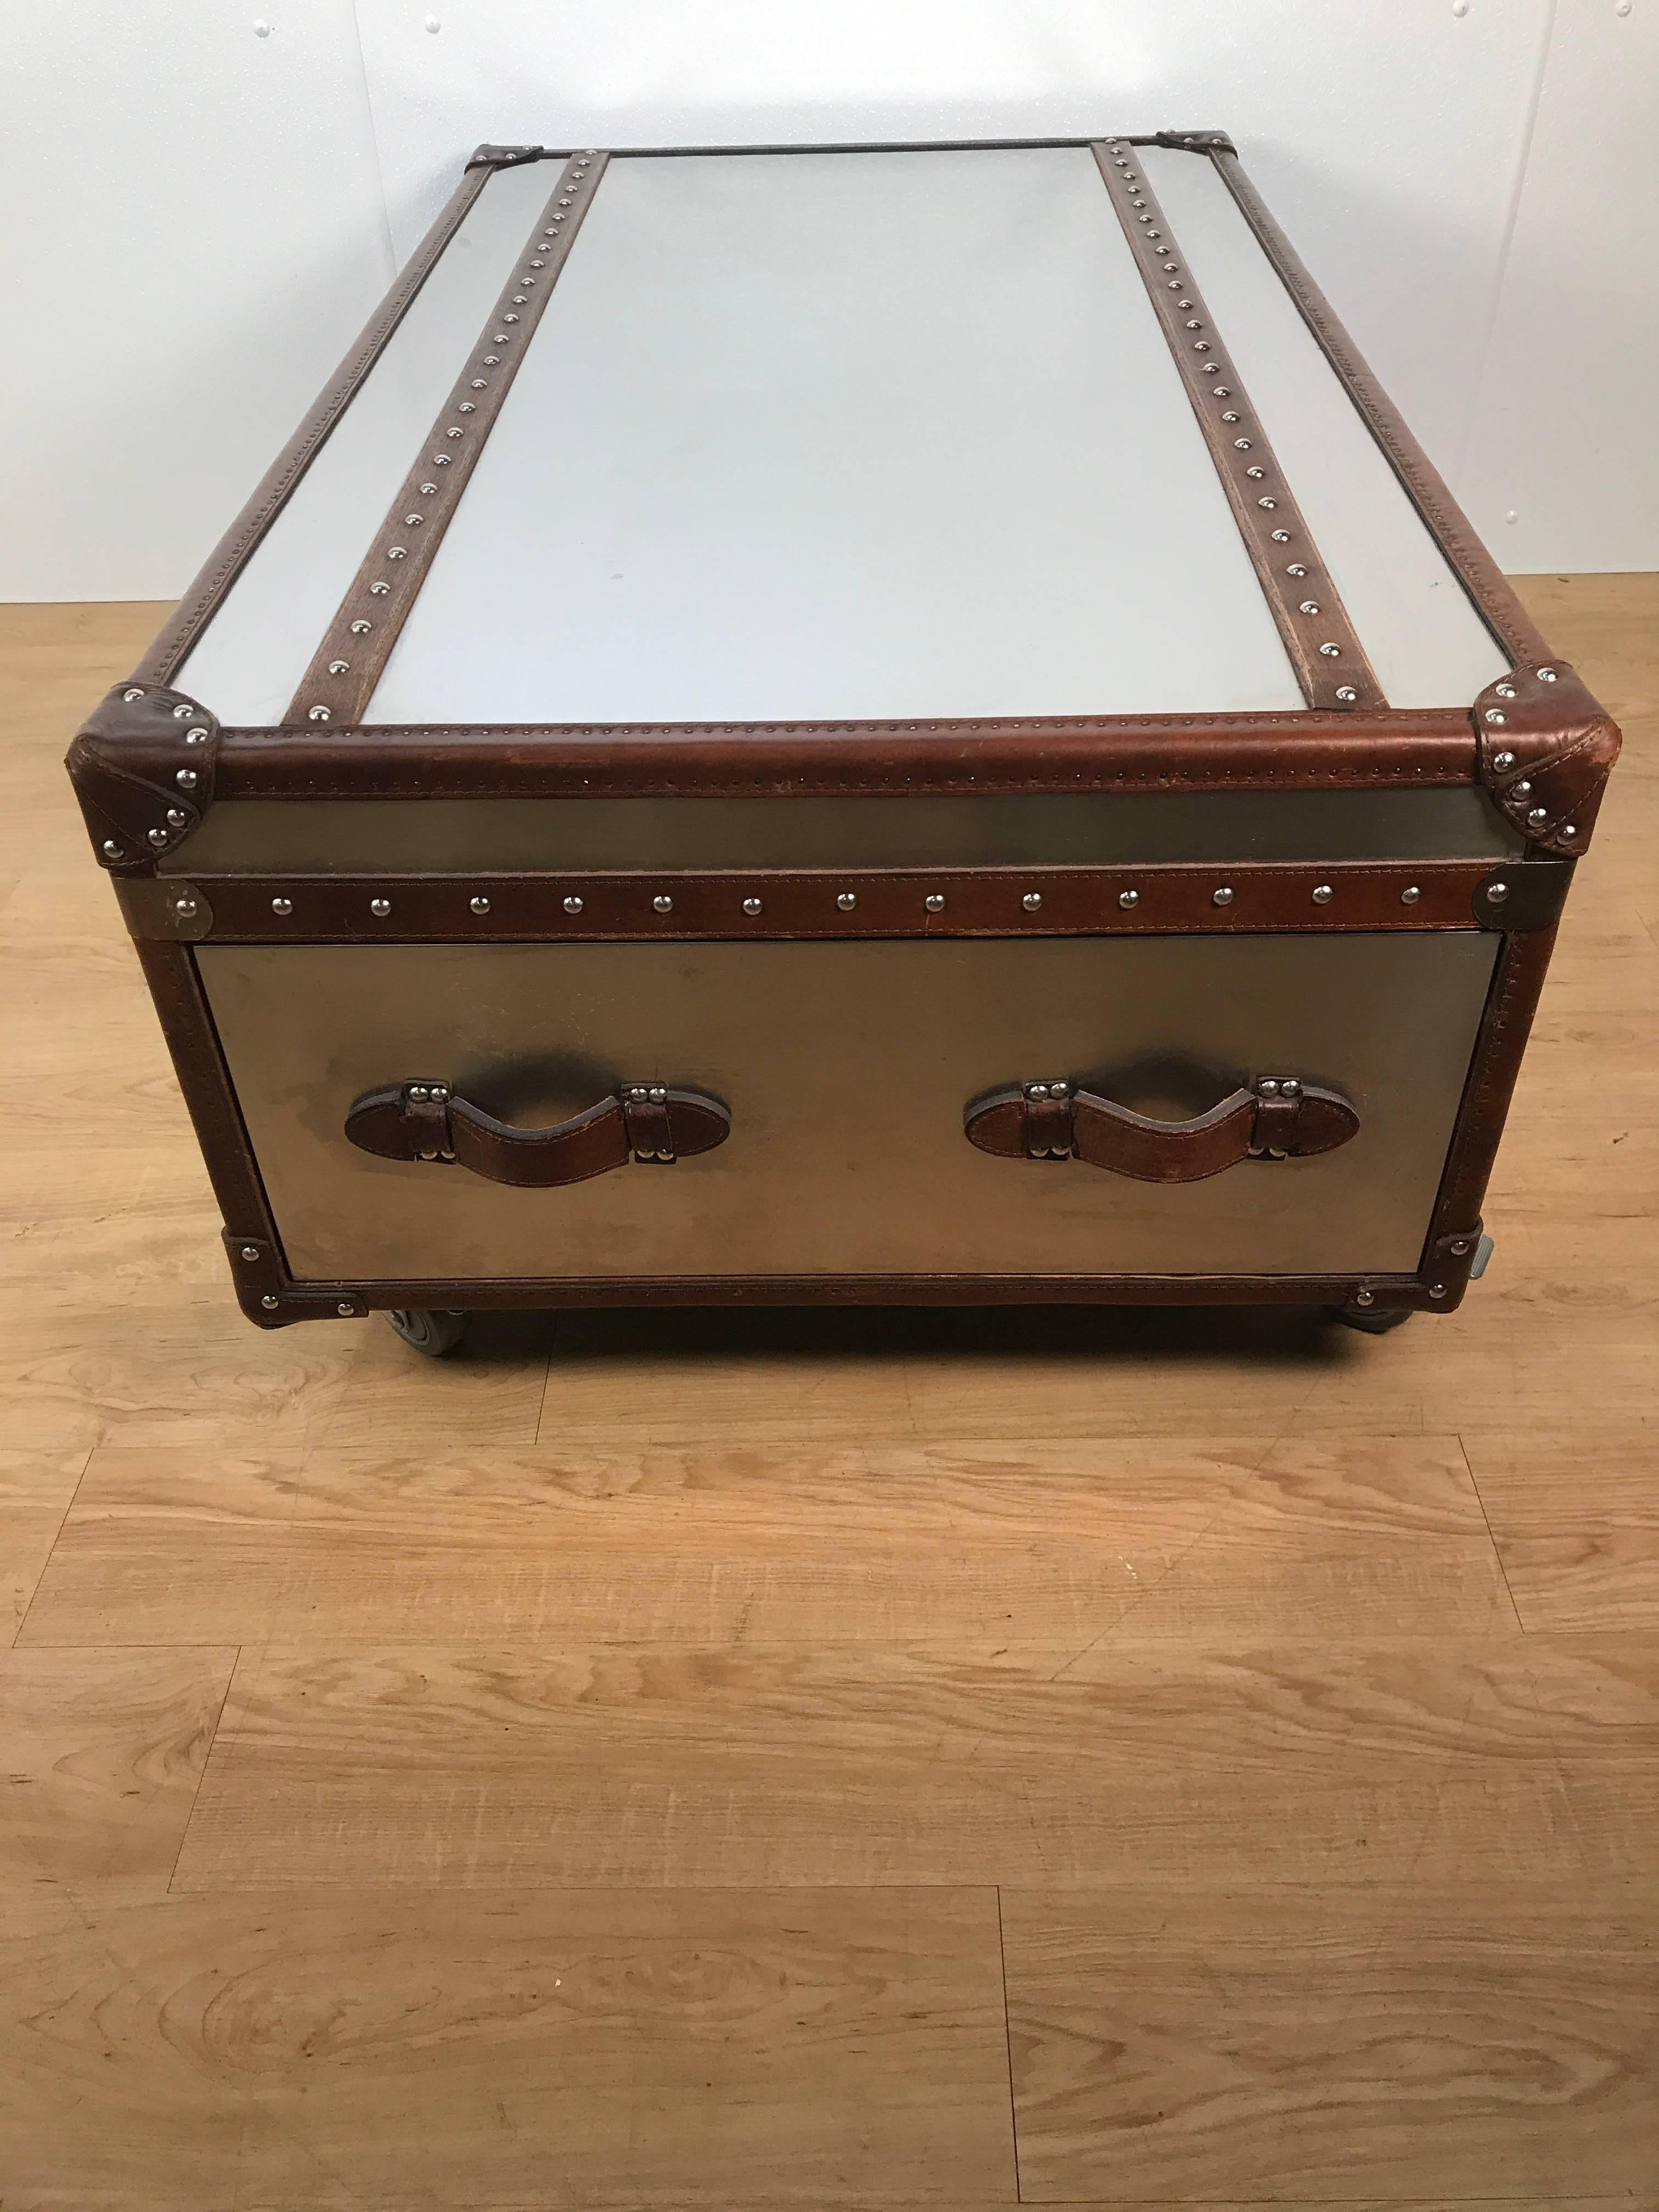 Campaign Stainless Steel and Leather Bound Trunk Coffee Table with Two Side Drawers